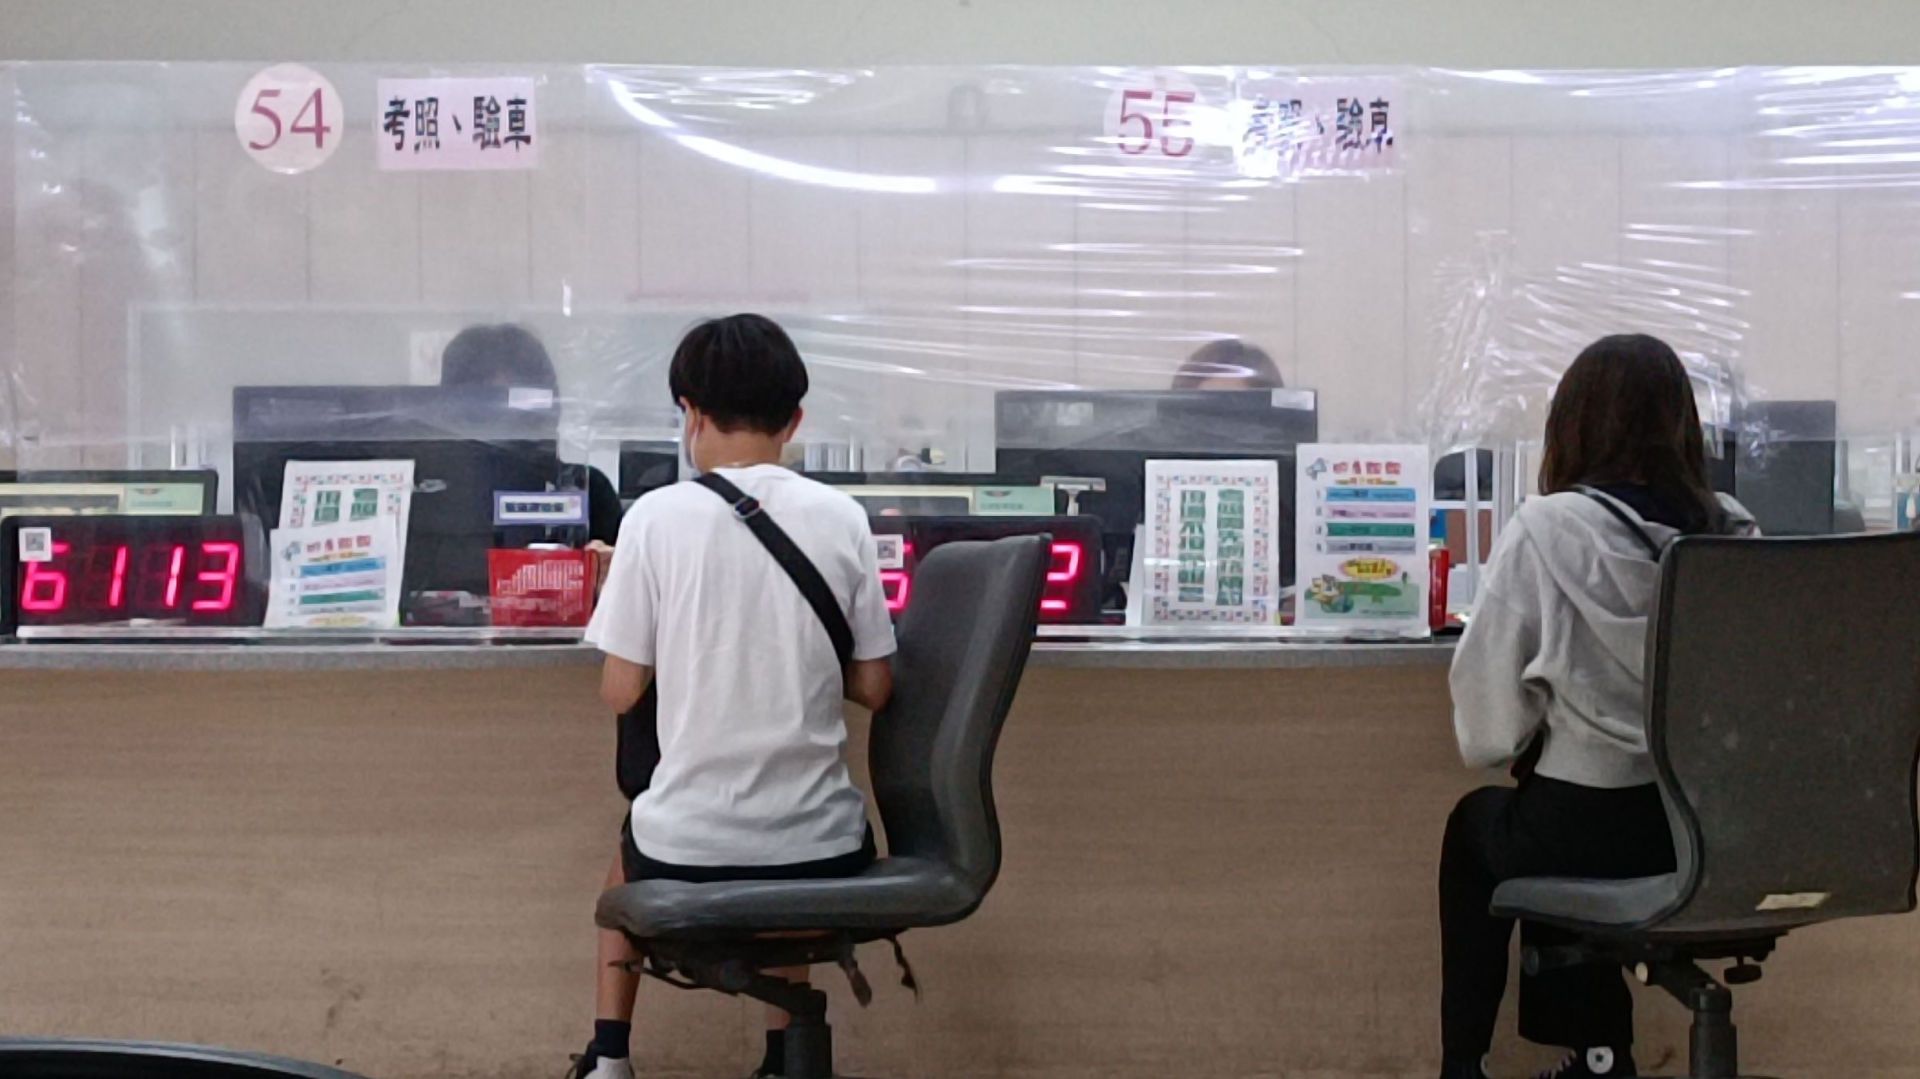 People sitting on swivel chairs at a counter, being served by administrative workers behind protective plastic screens.